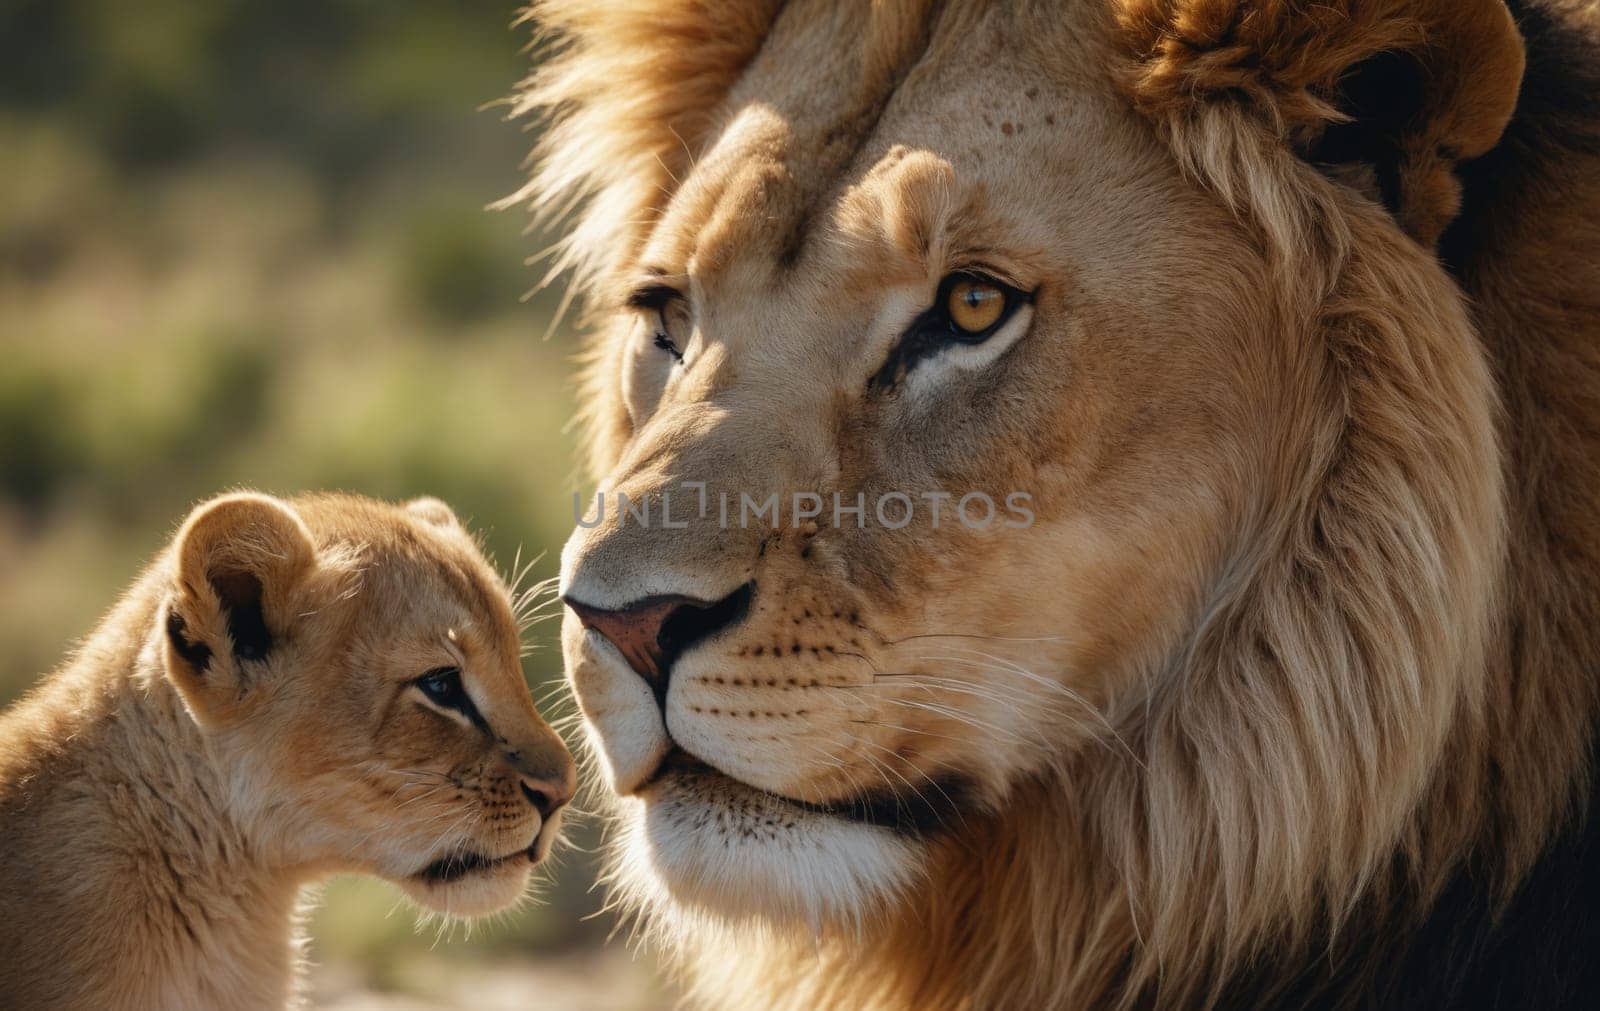 A Felidae organism, the Masai lion, and its cub, both Carnivores and terrestrial animals, are gazing at each other with their distinctive whiskers and adaptations for hunting in the grasslands